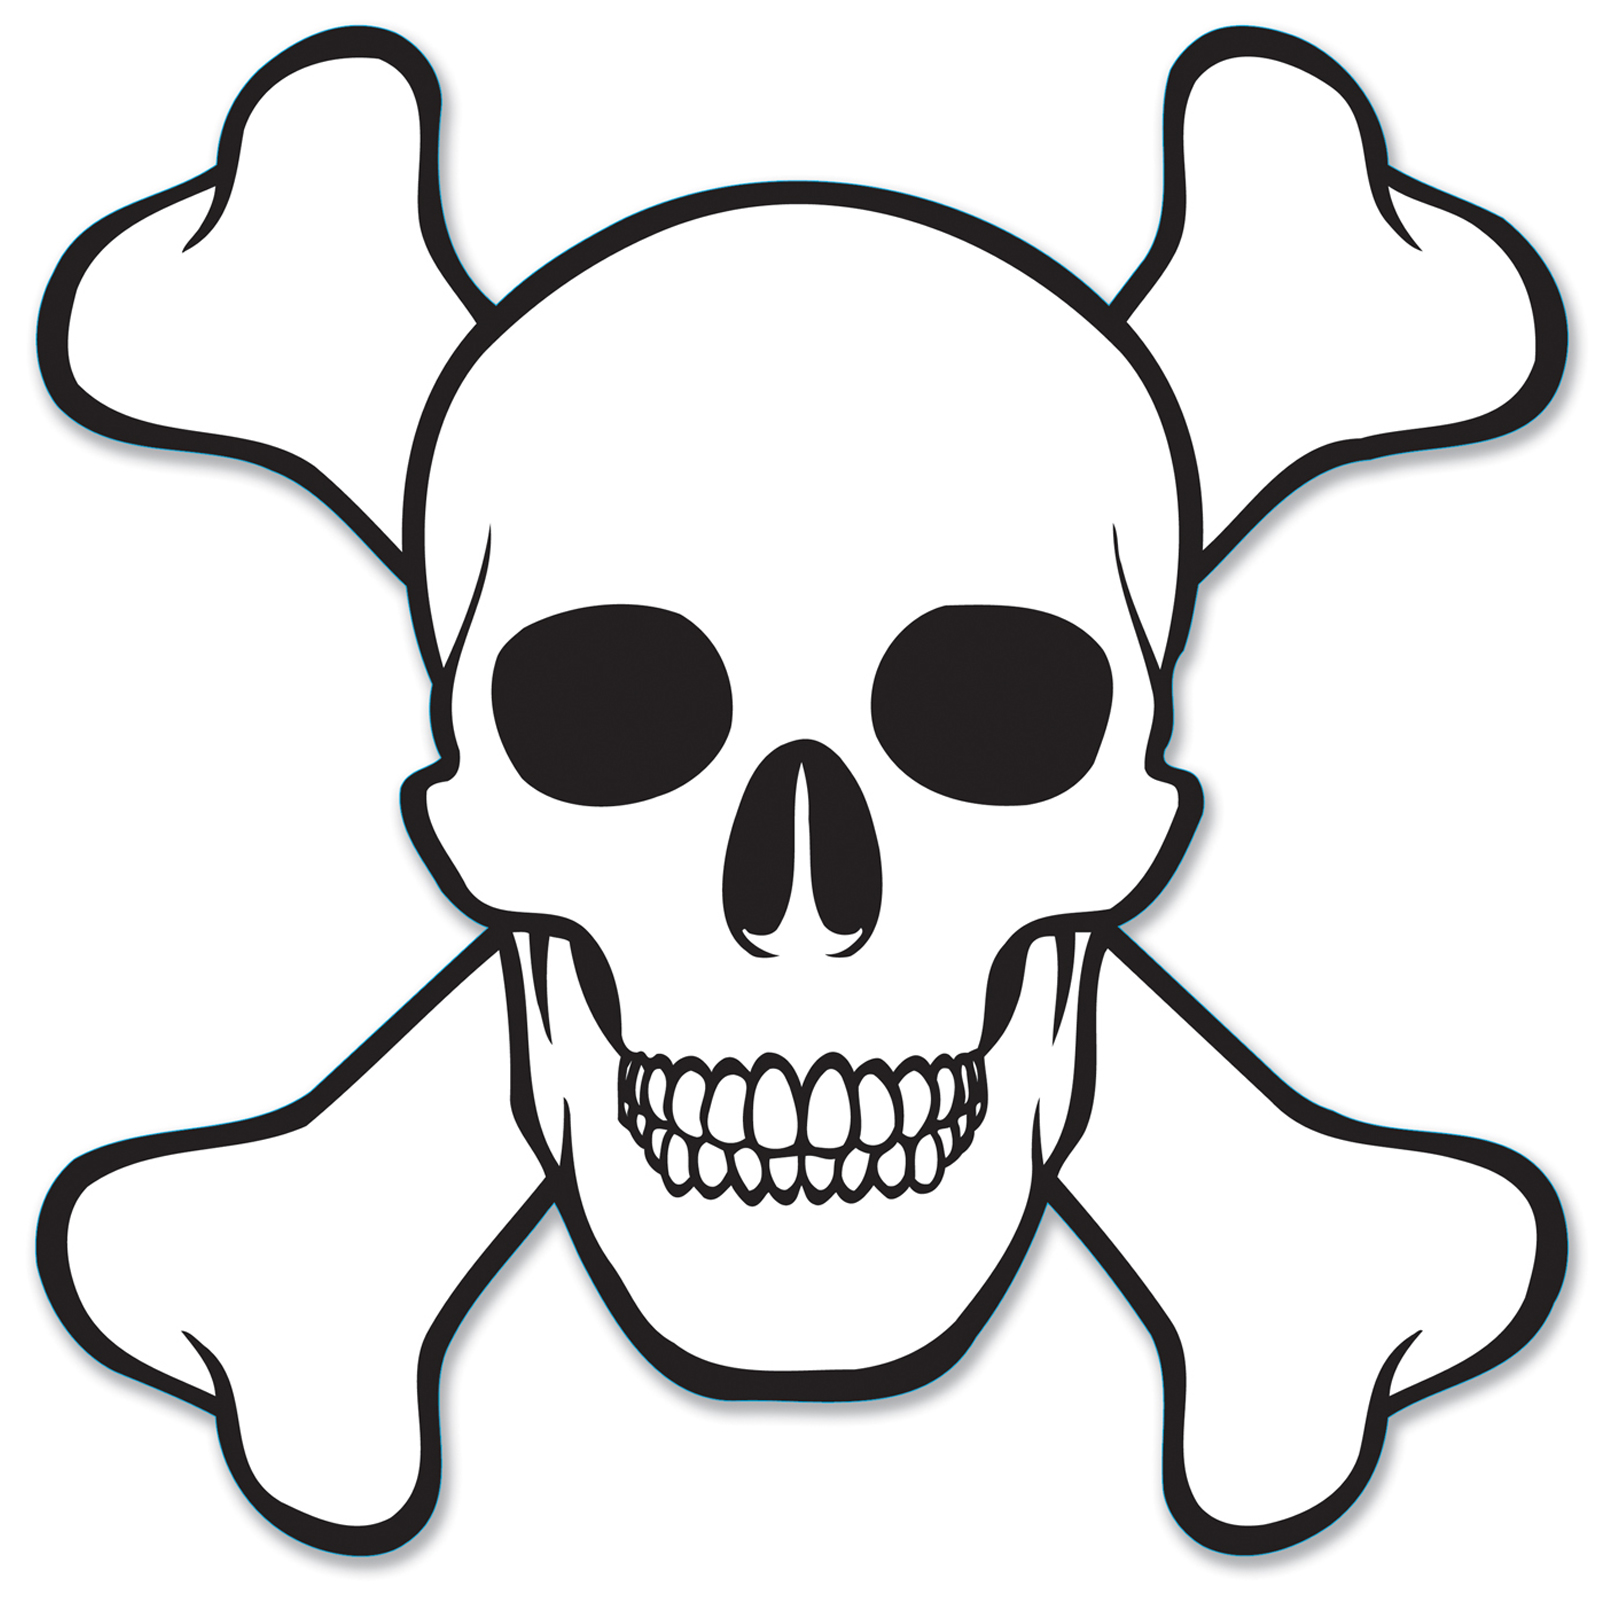 SIMPLE SKULL AND CROSSBONES CLIPART